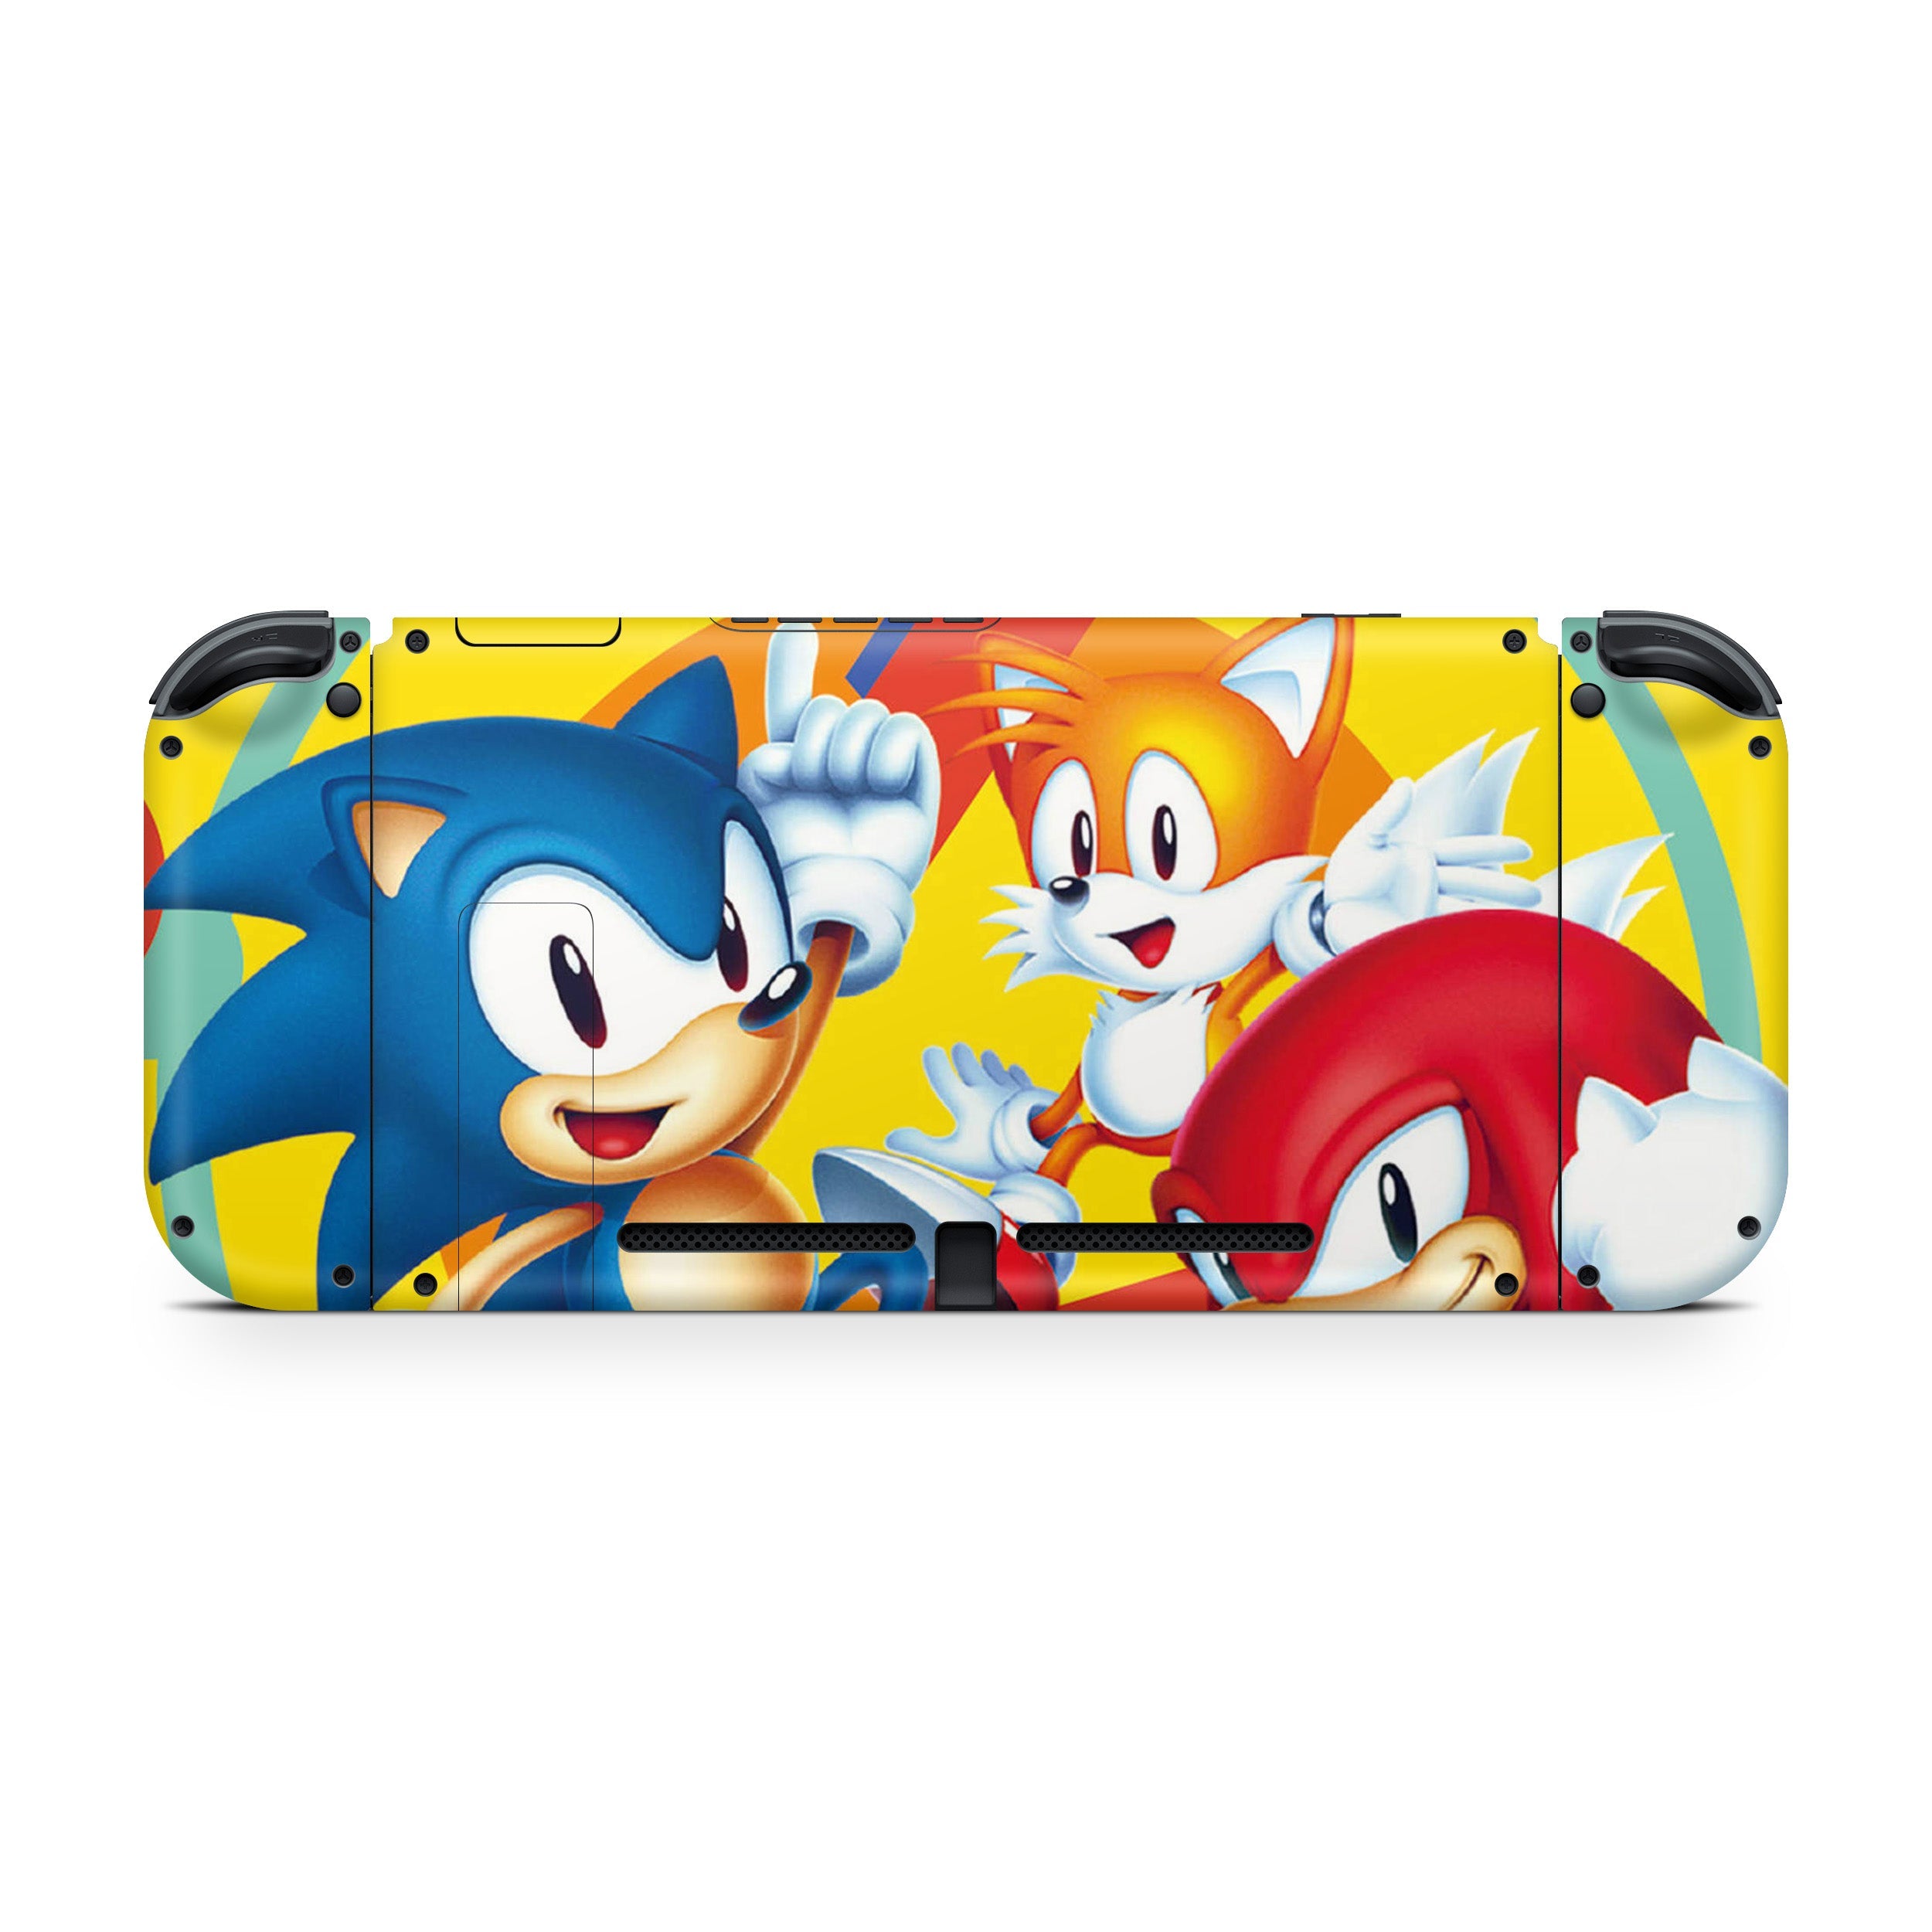 A video game skin featuring a Sonic The Hedgehog design for the Nintendo Switch.